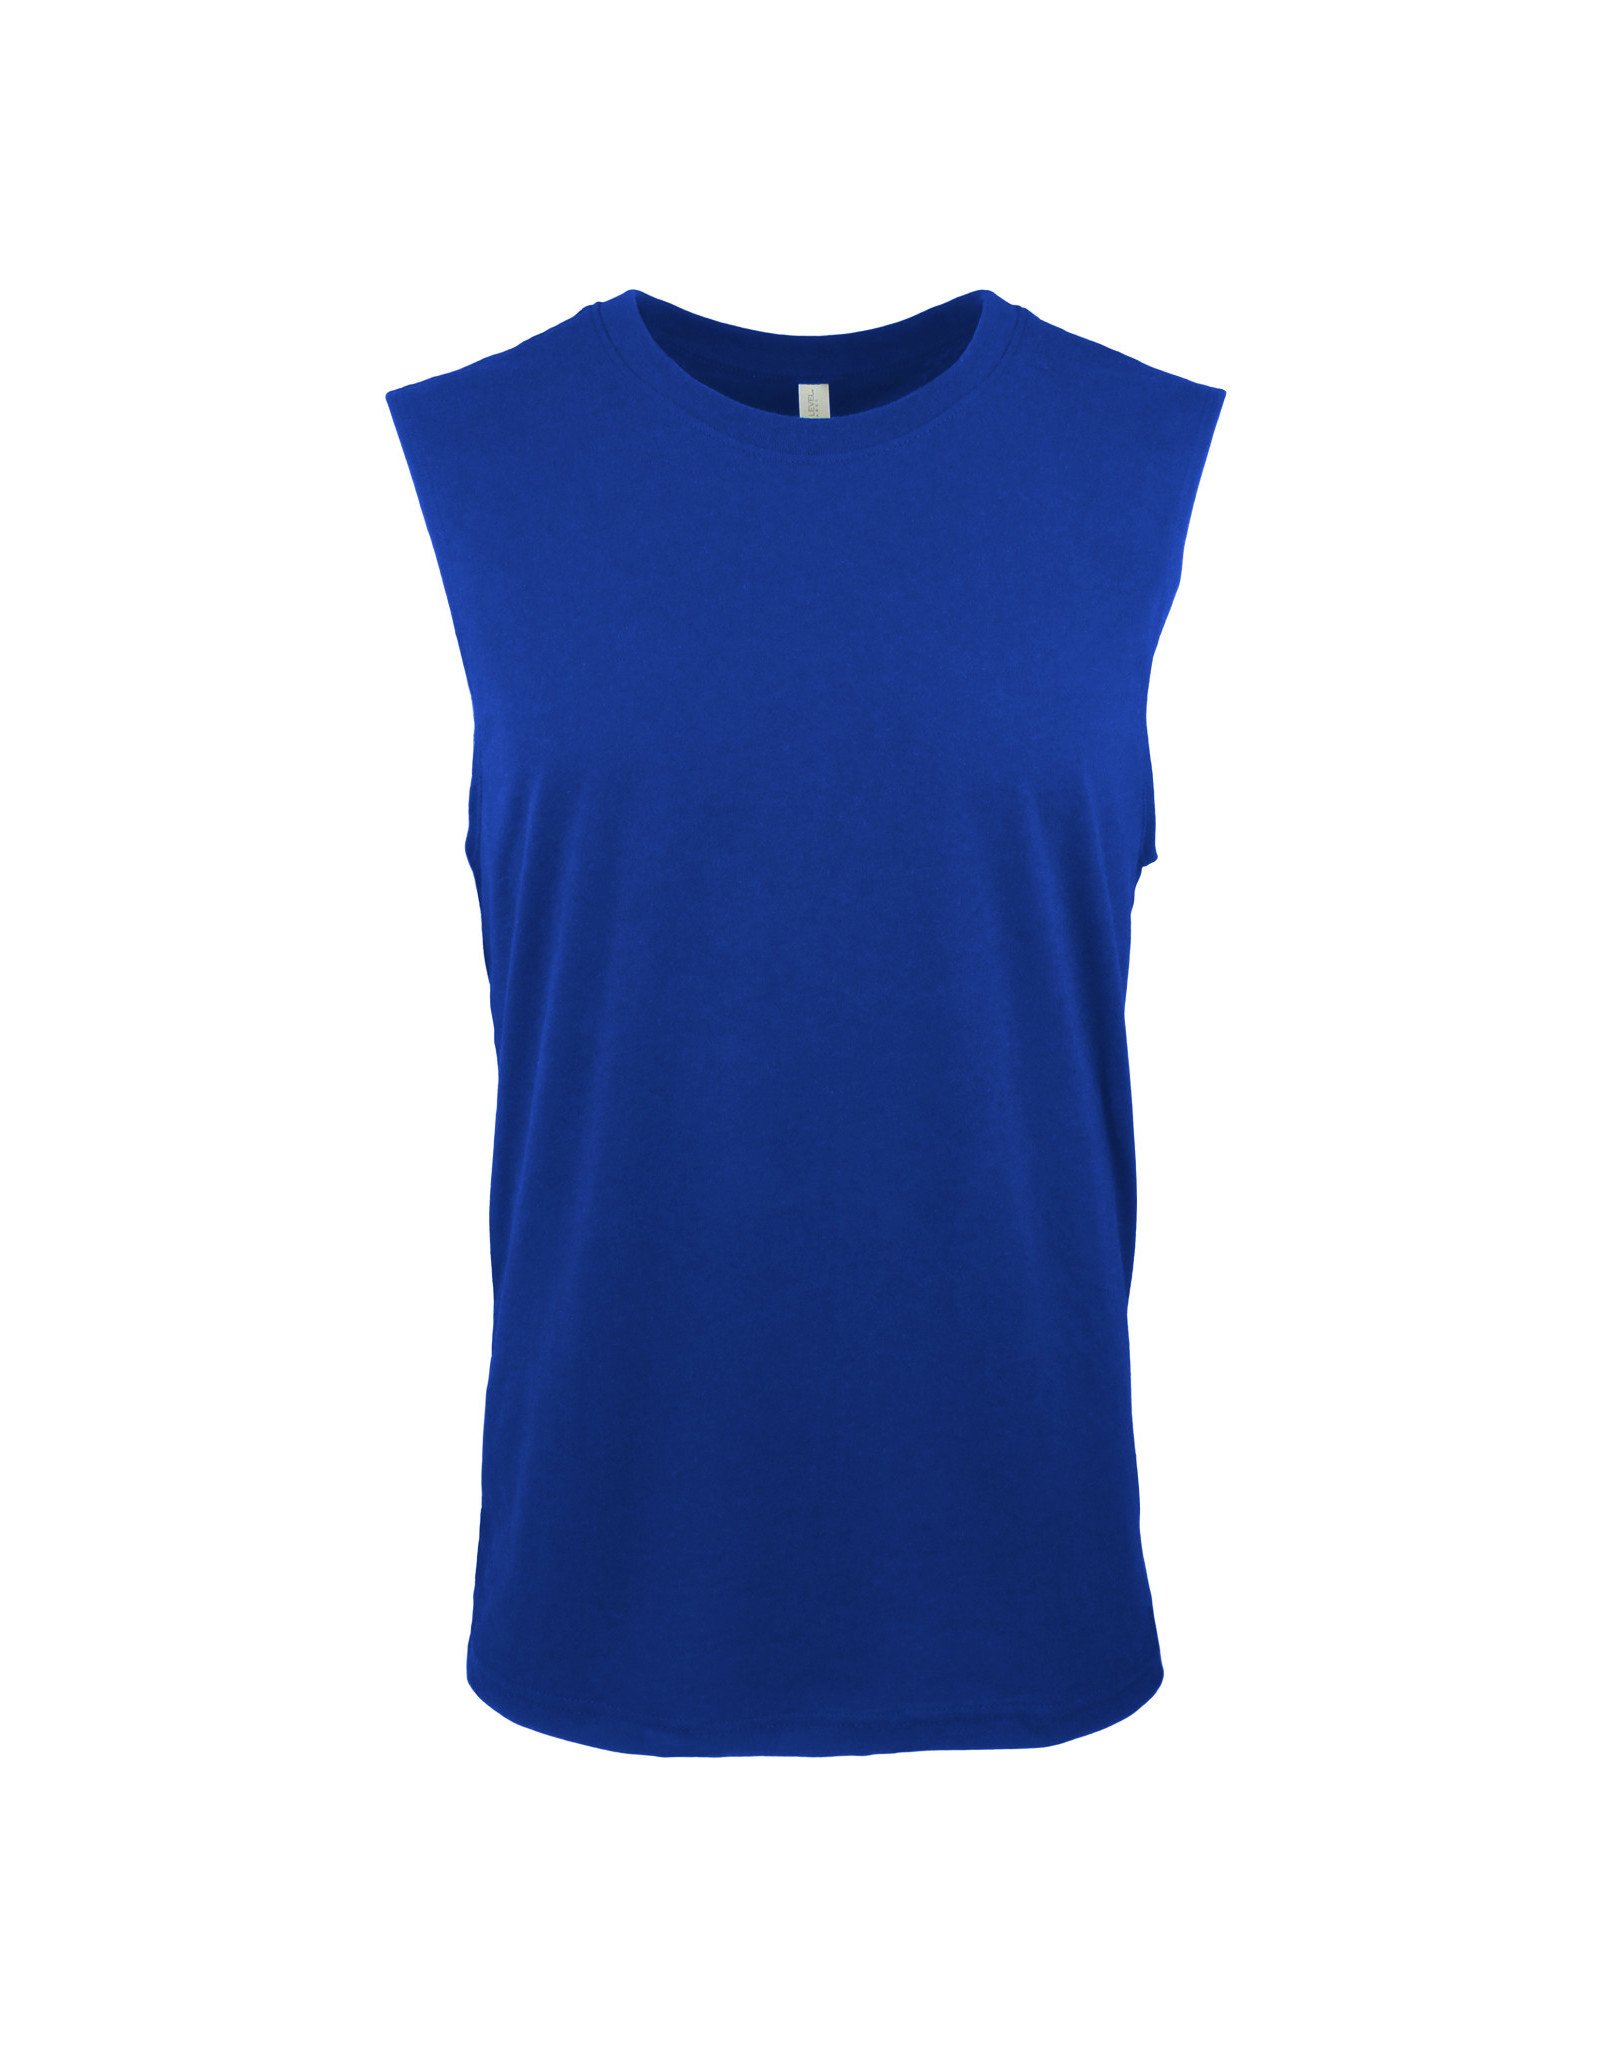 Next Level Apparel Muscle Tank - 6333